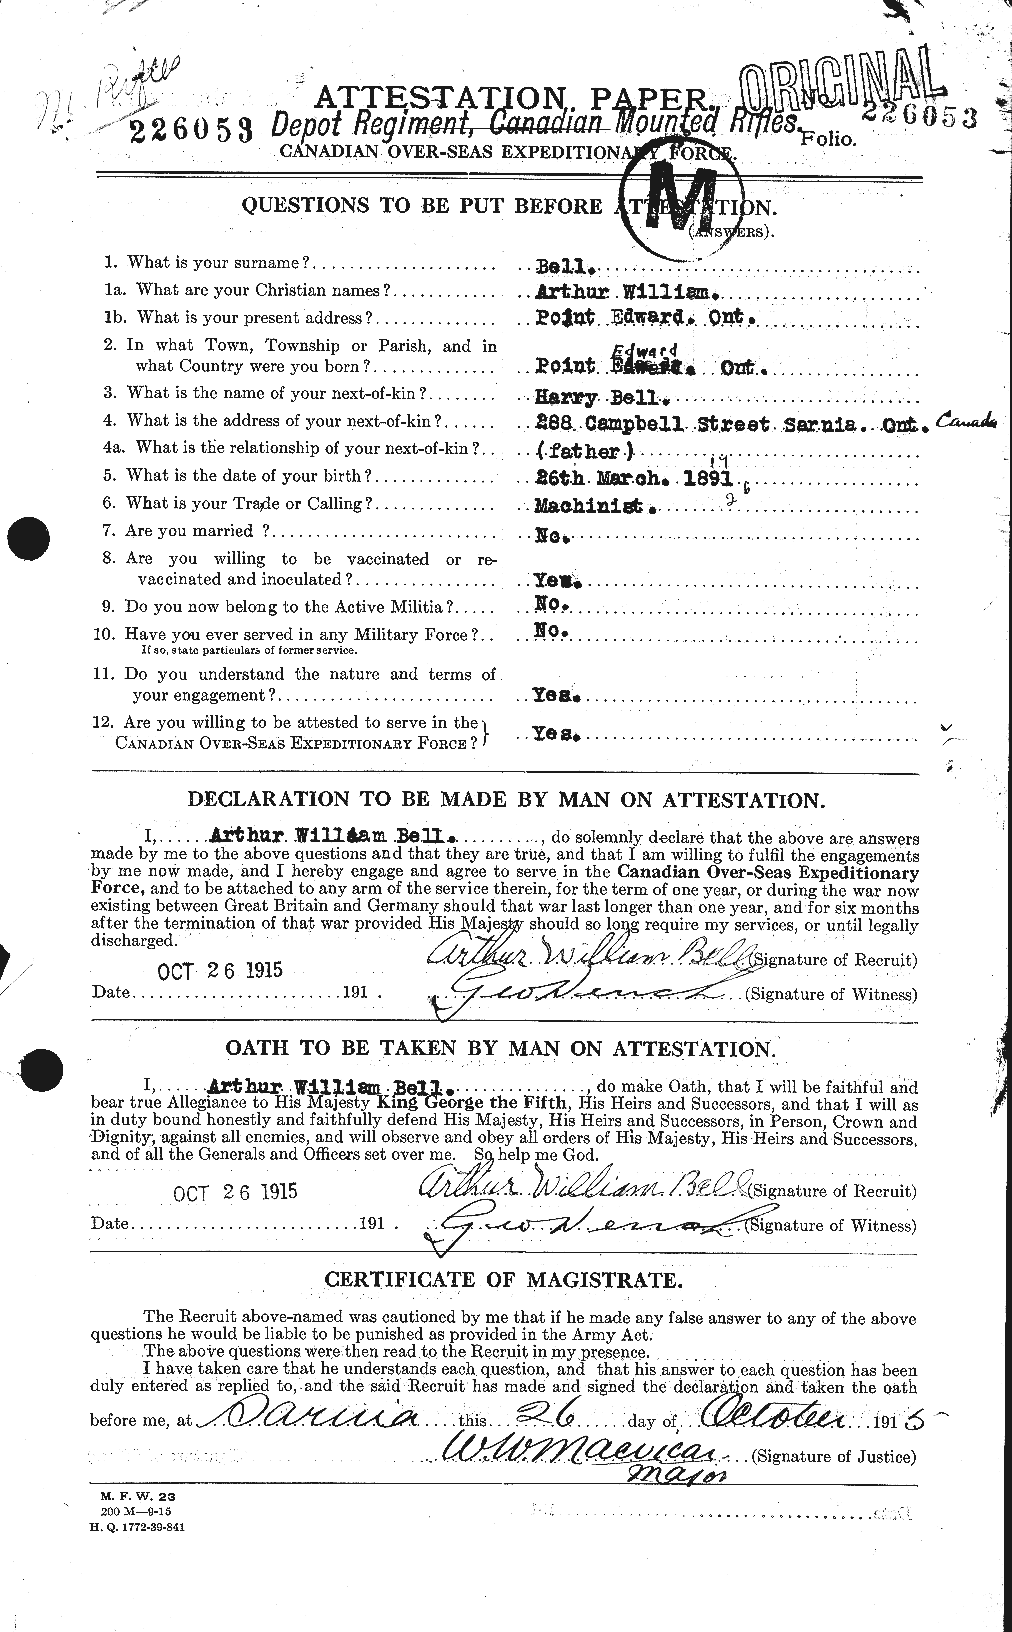 Personnel Records of the First World War - CEF 233898a